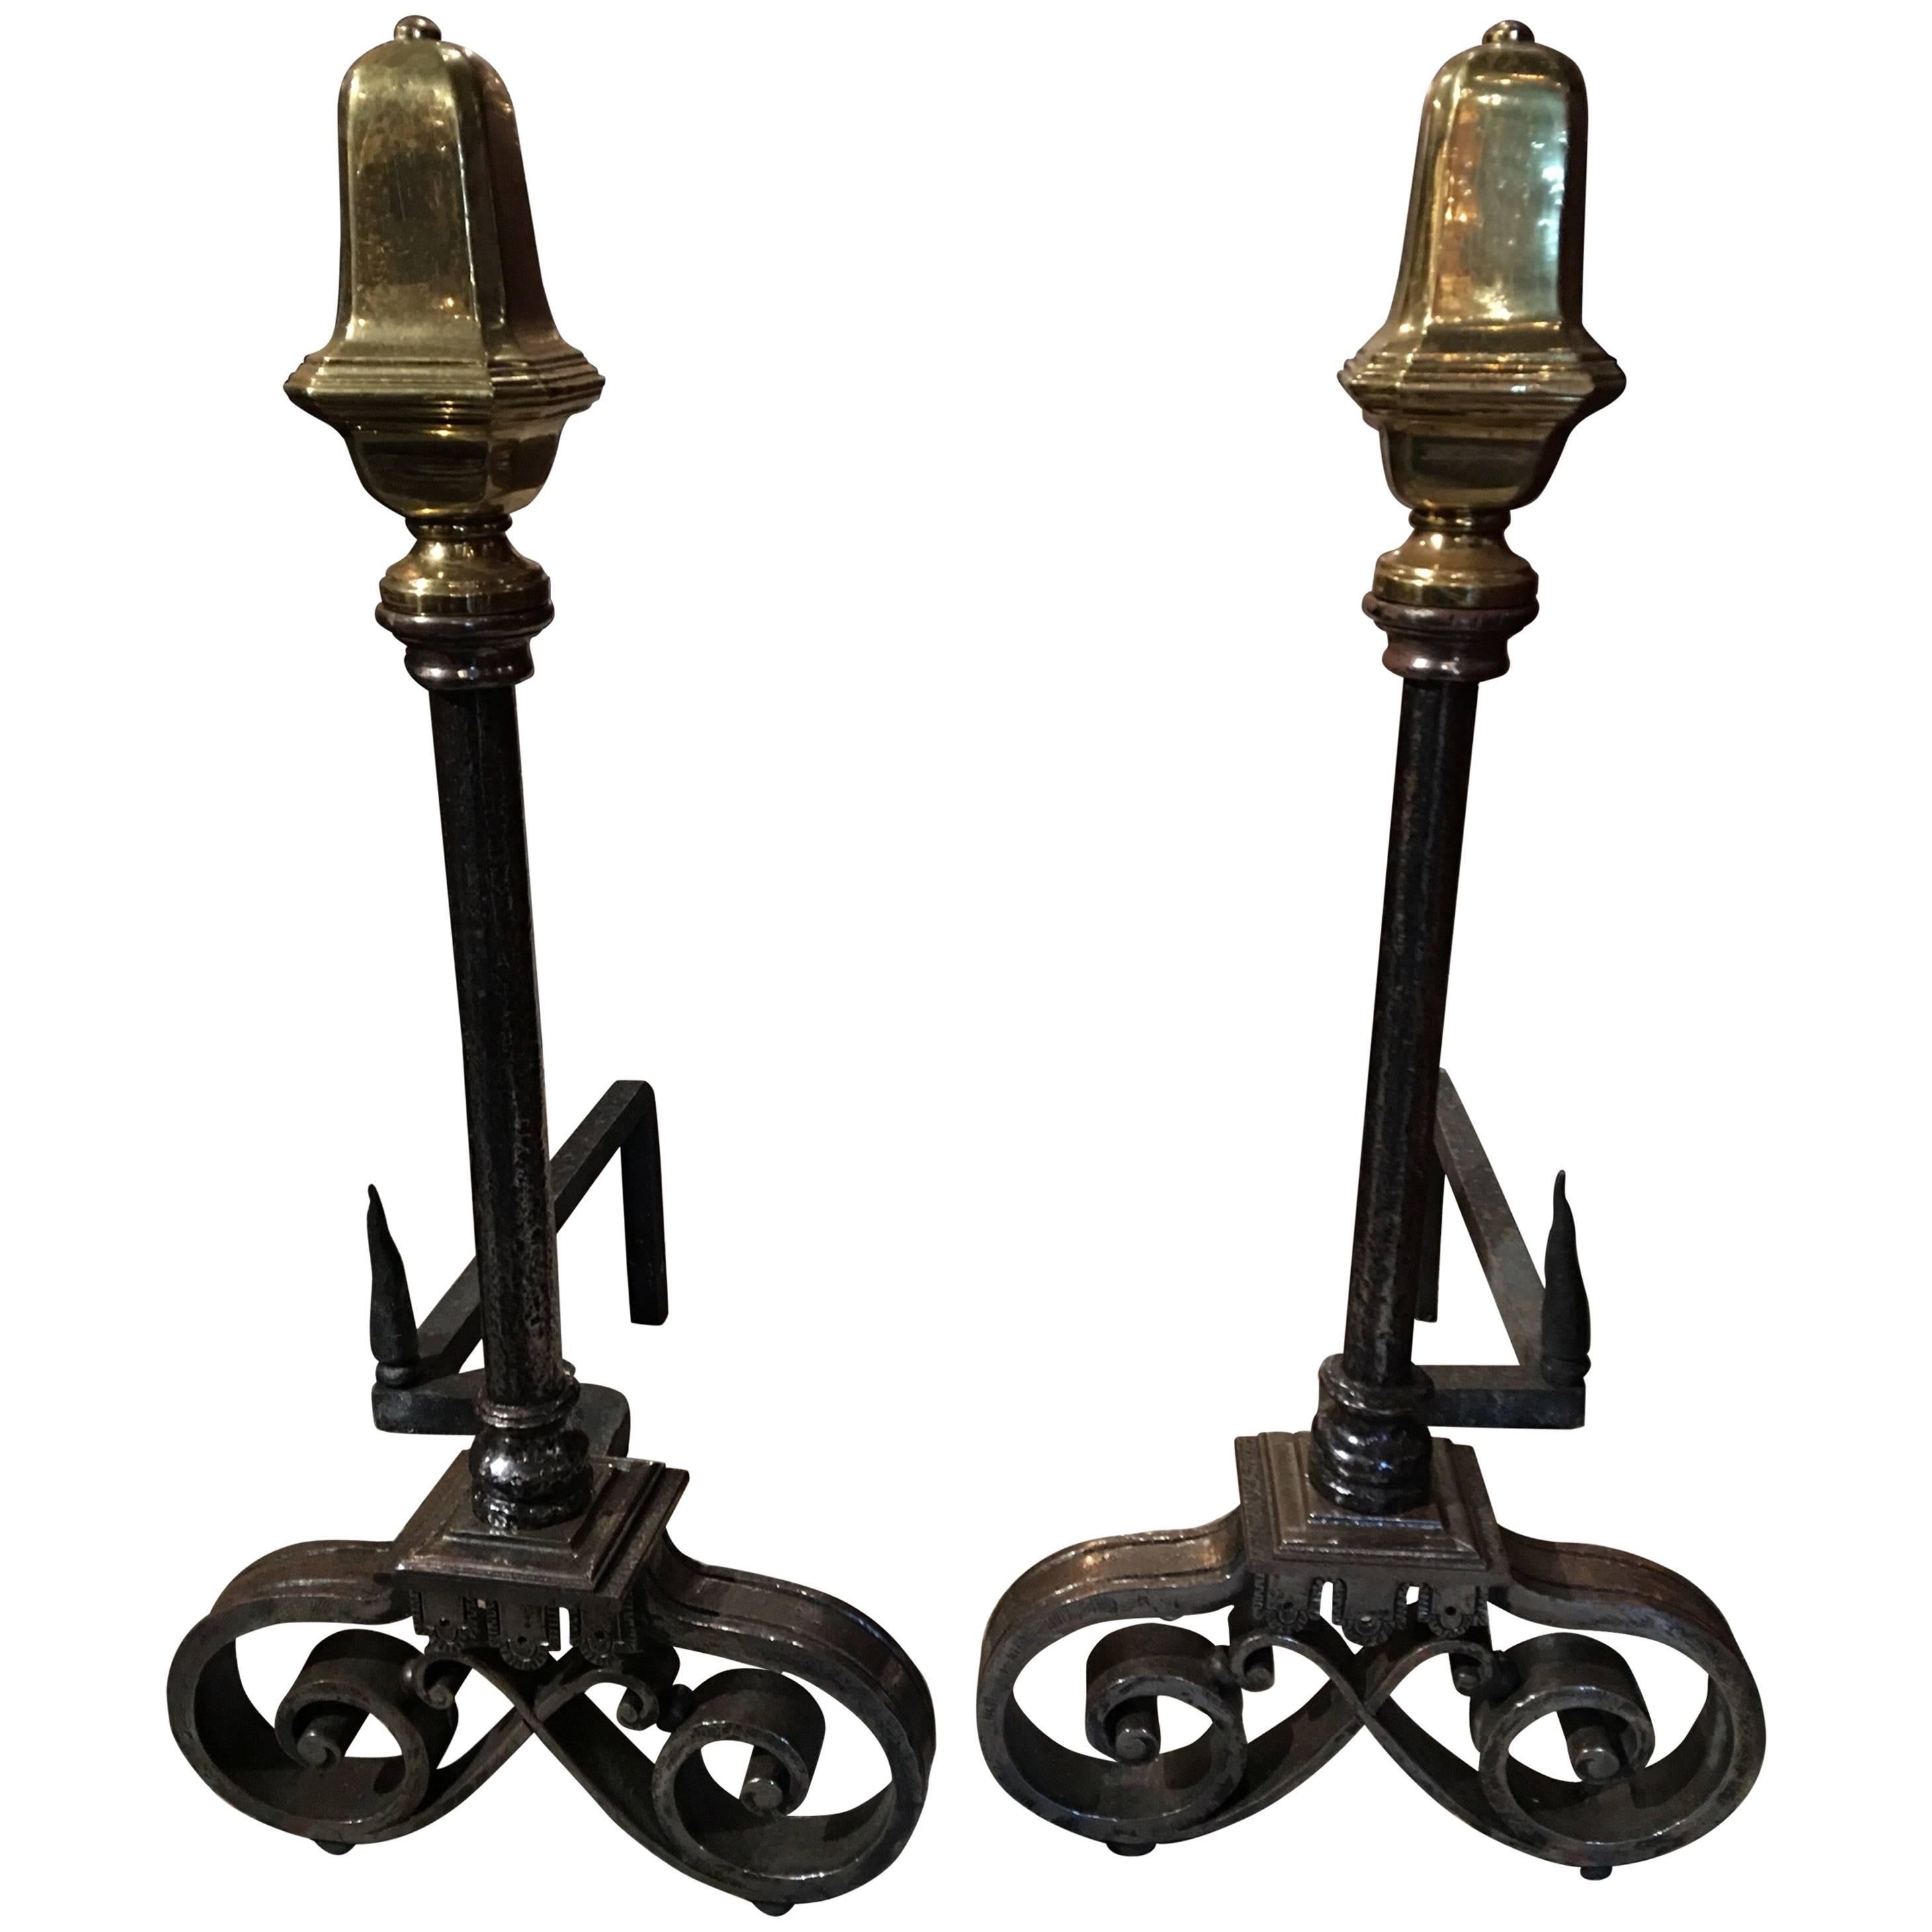 Pair of Polished Iron and Brass Chenets or Andirons, 19th Century